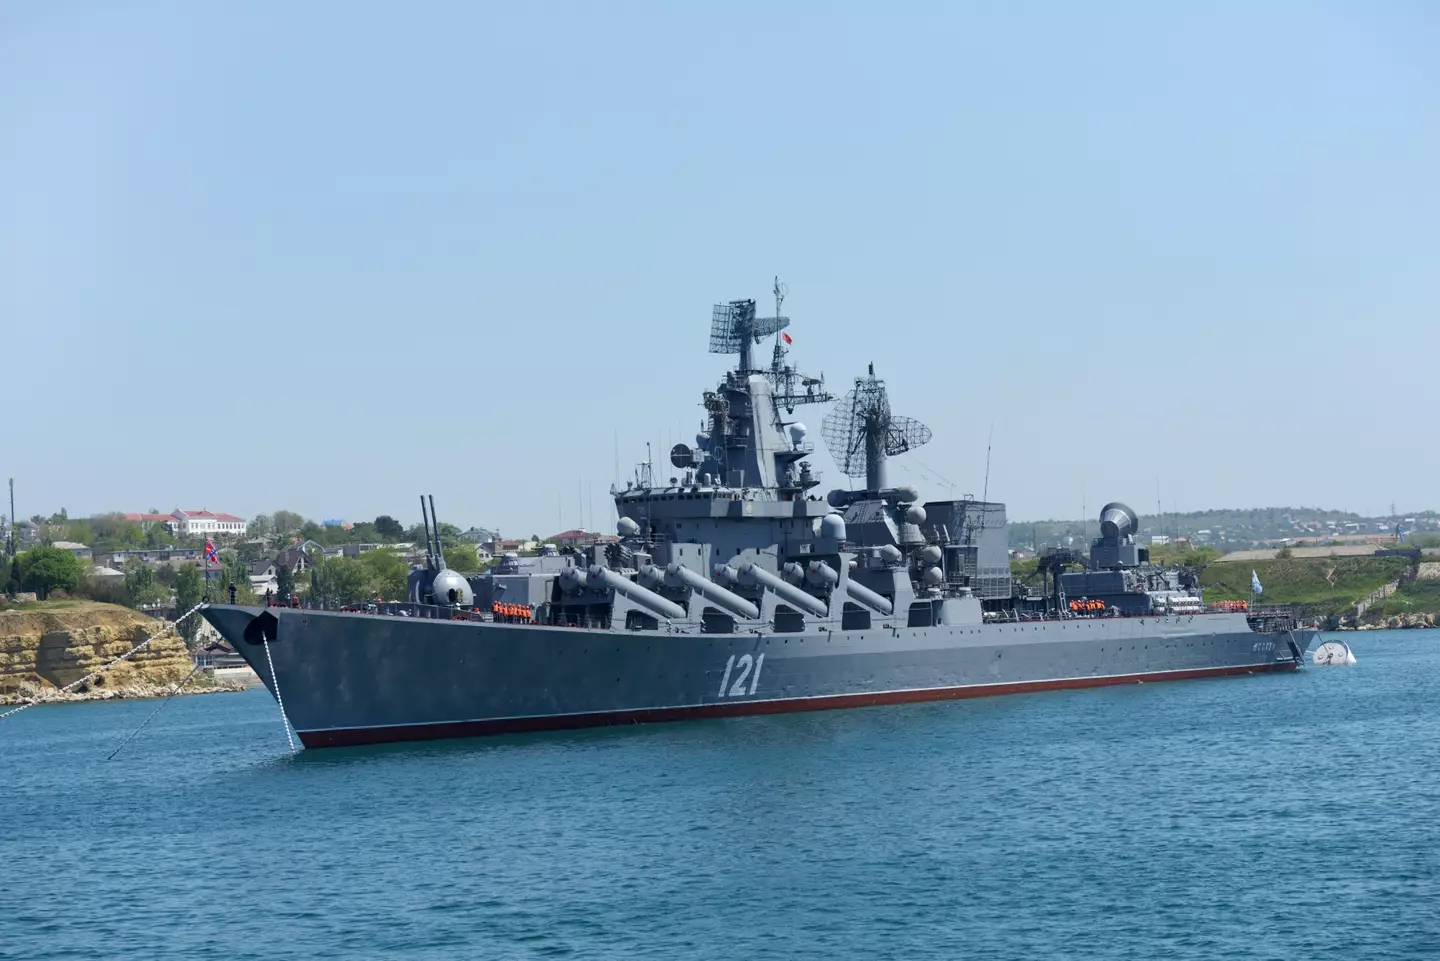 Moskva is billed as being ‘by far the most powerful warship in the Black Sea’.